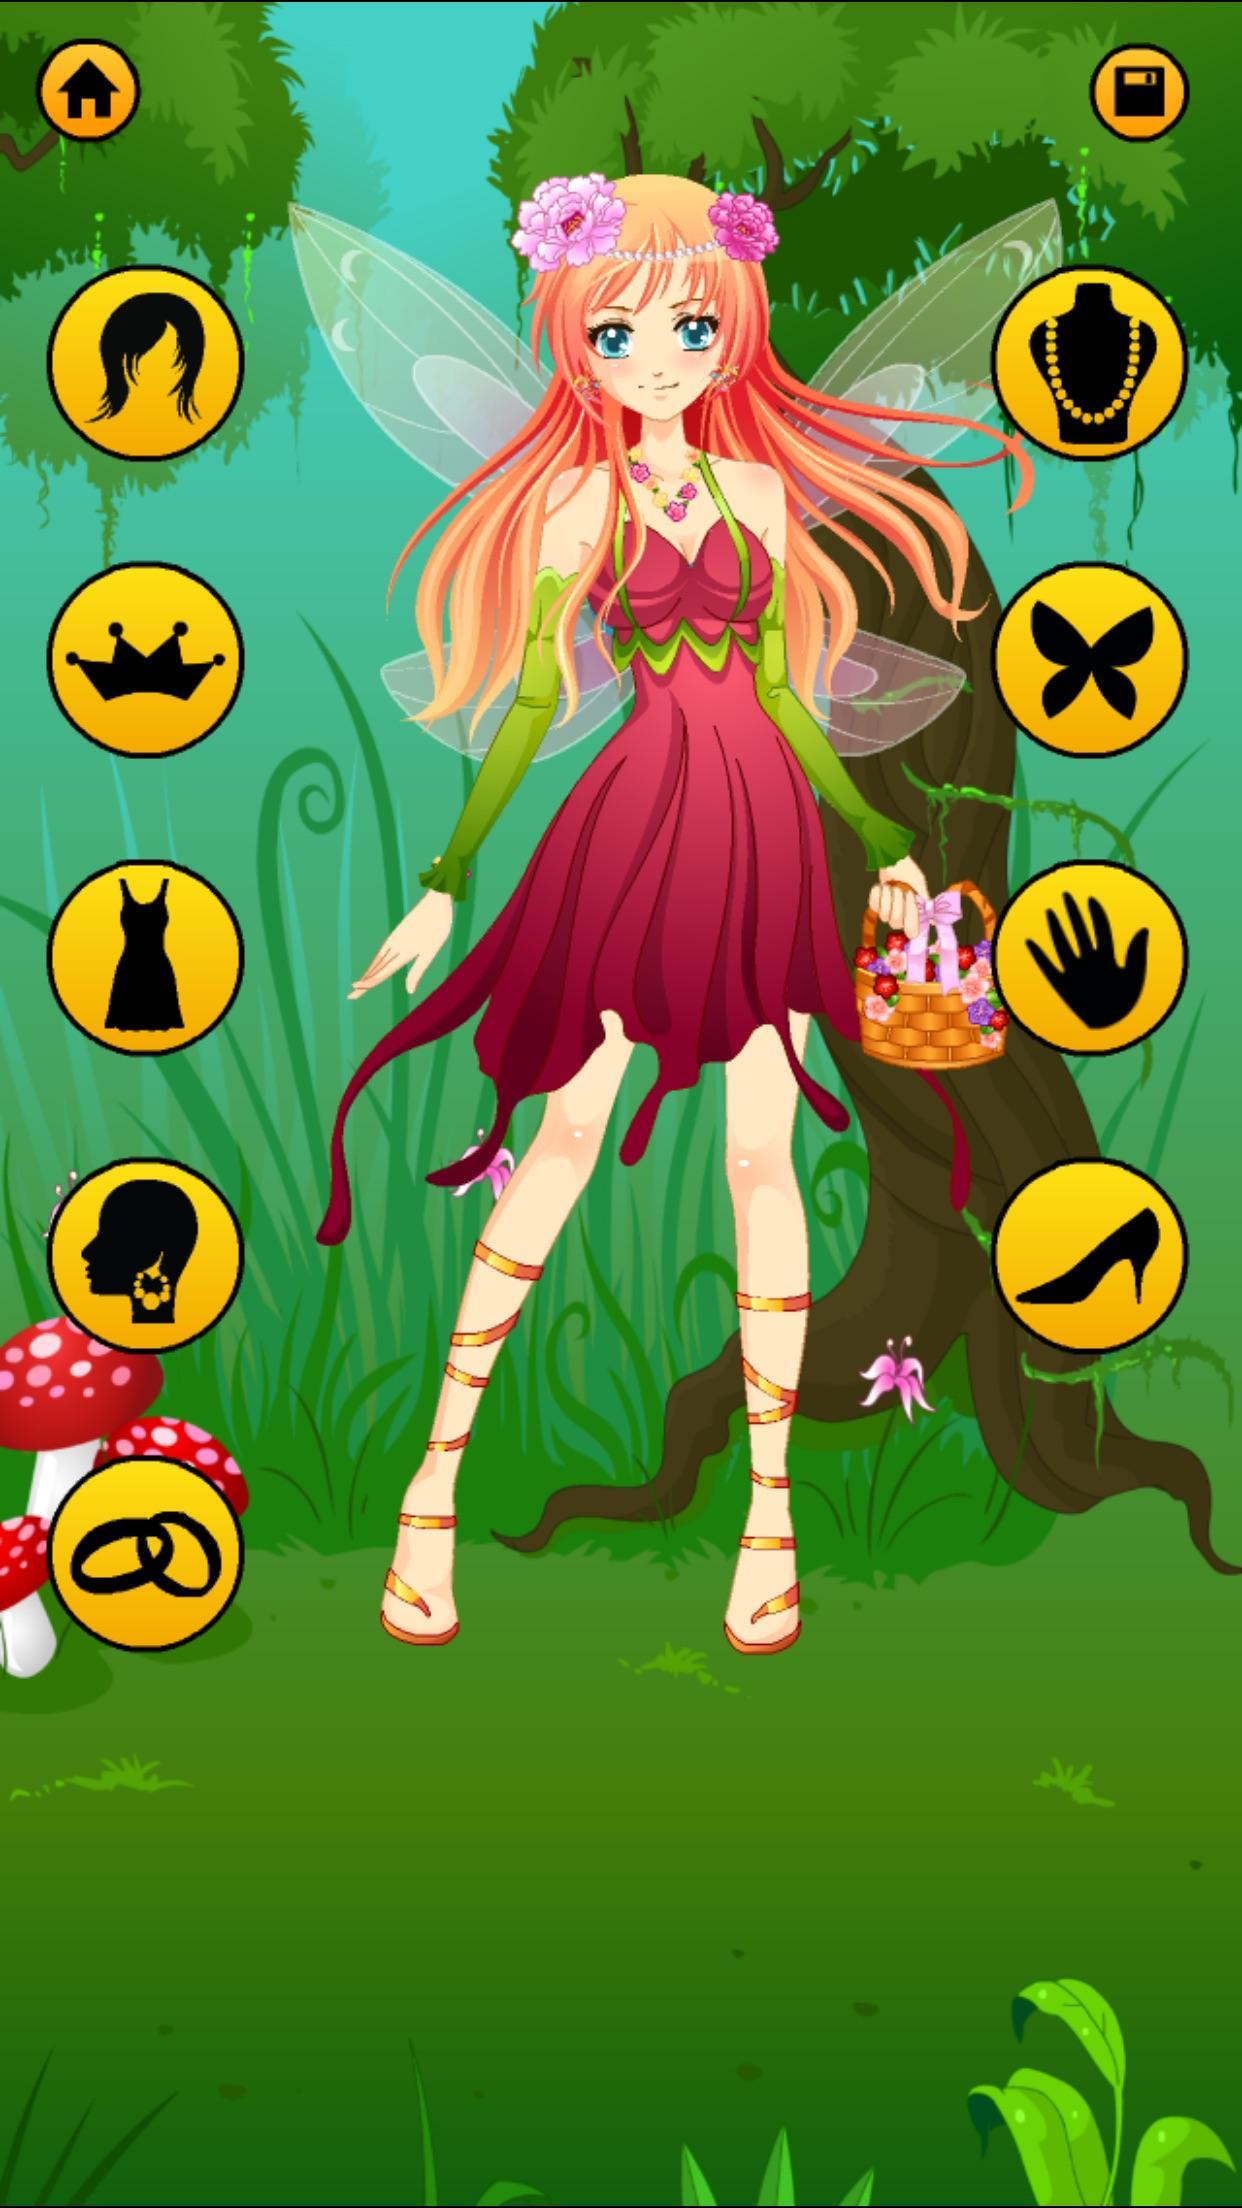 Anime Dress Up Games For Girls - Couple Love Kiss  - APK Download